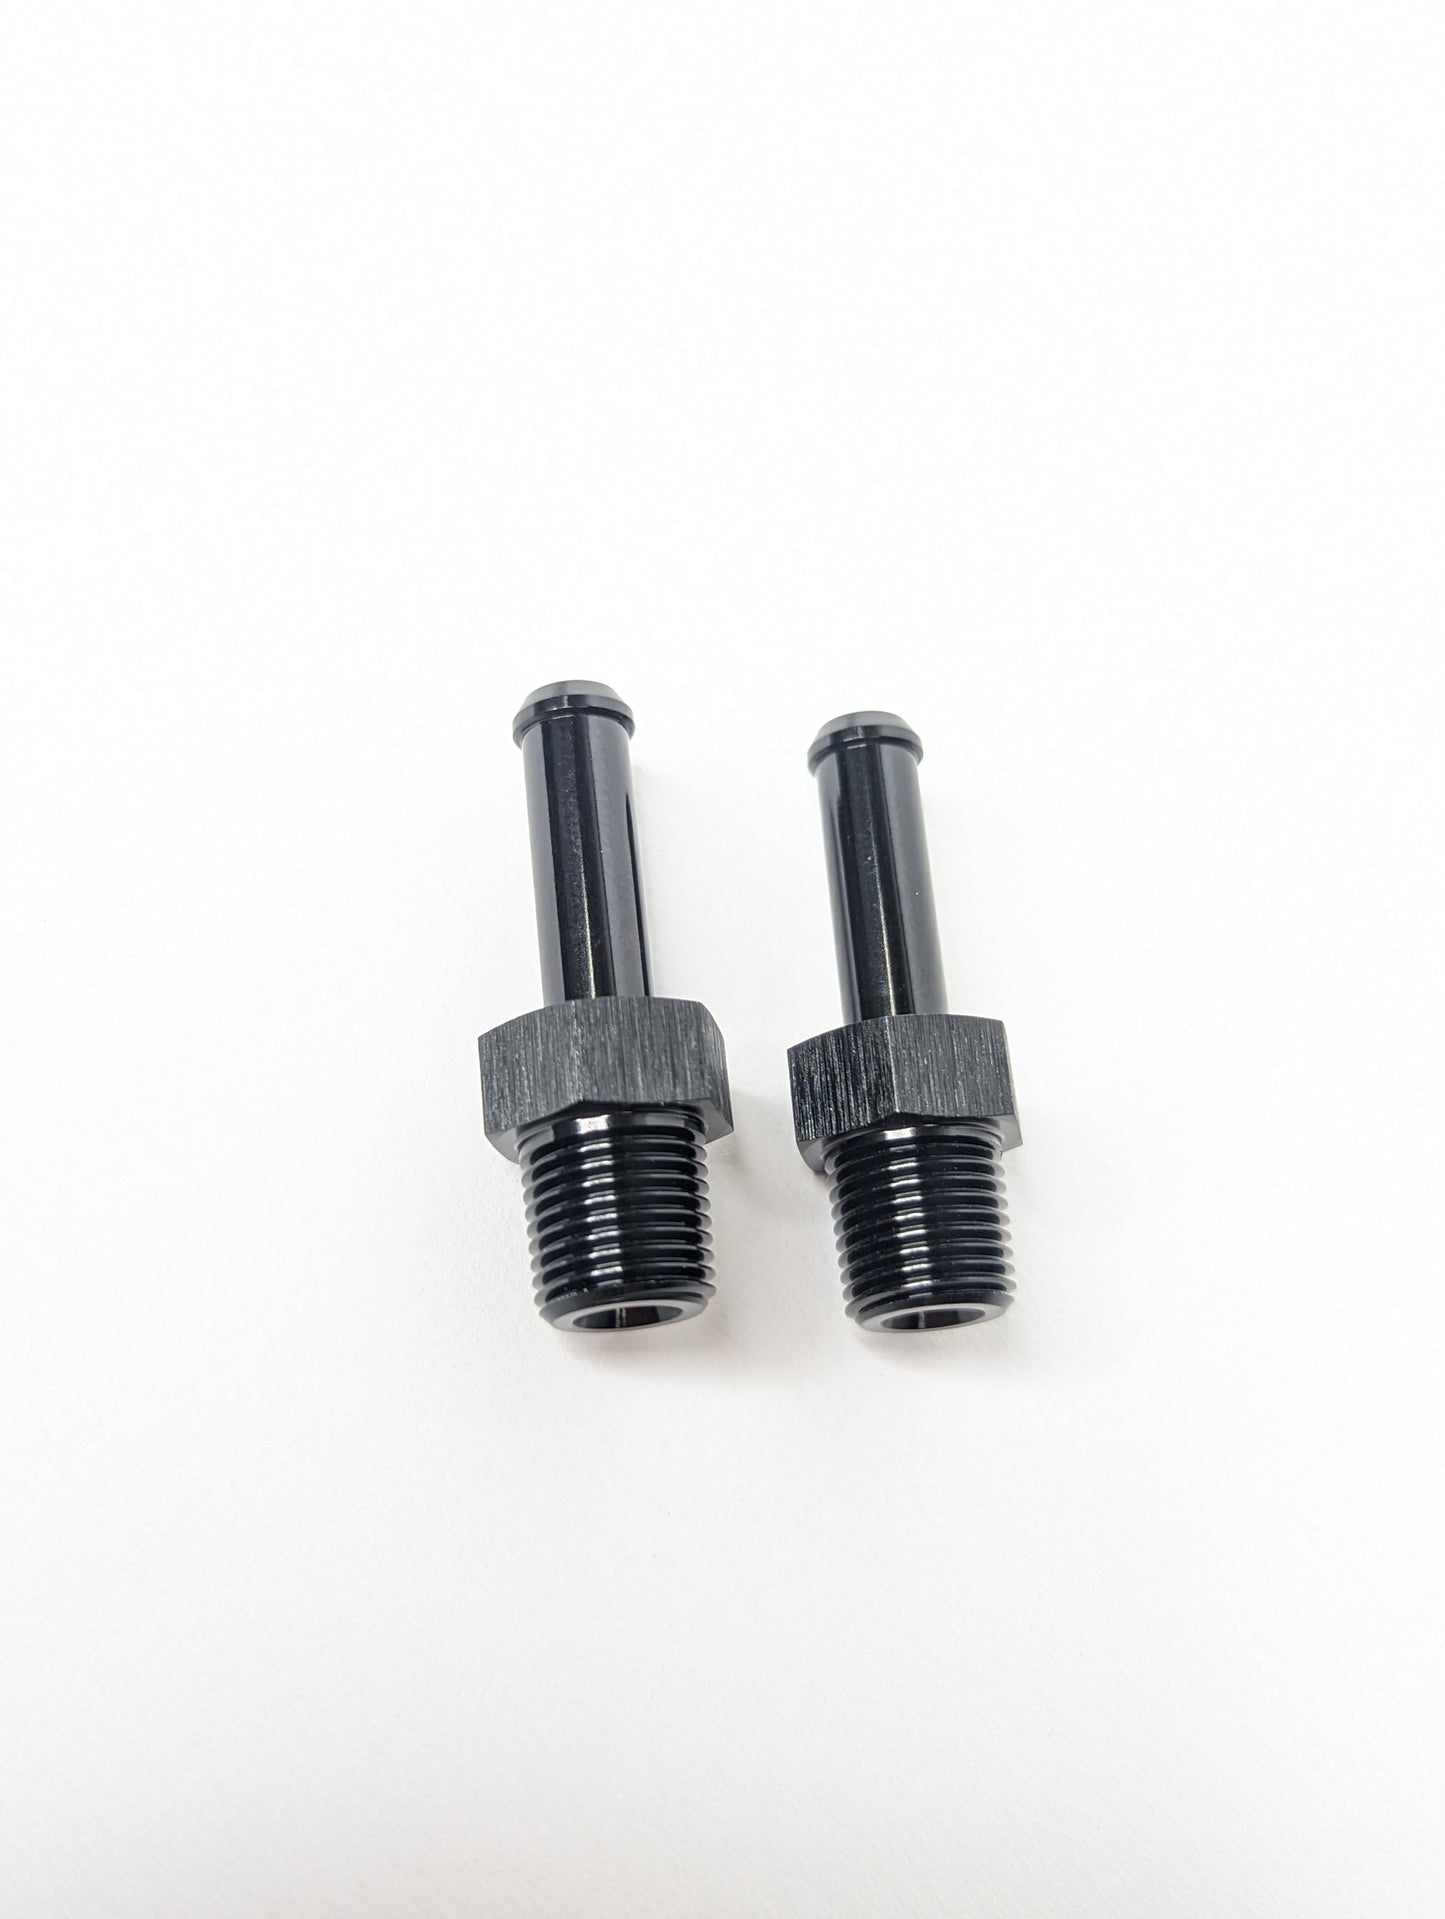 1/8" NPT to 1/4" Straight Fittings (2)